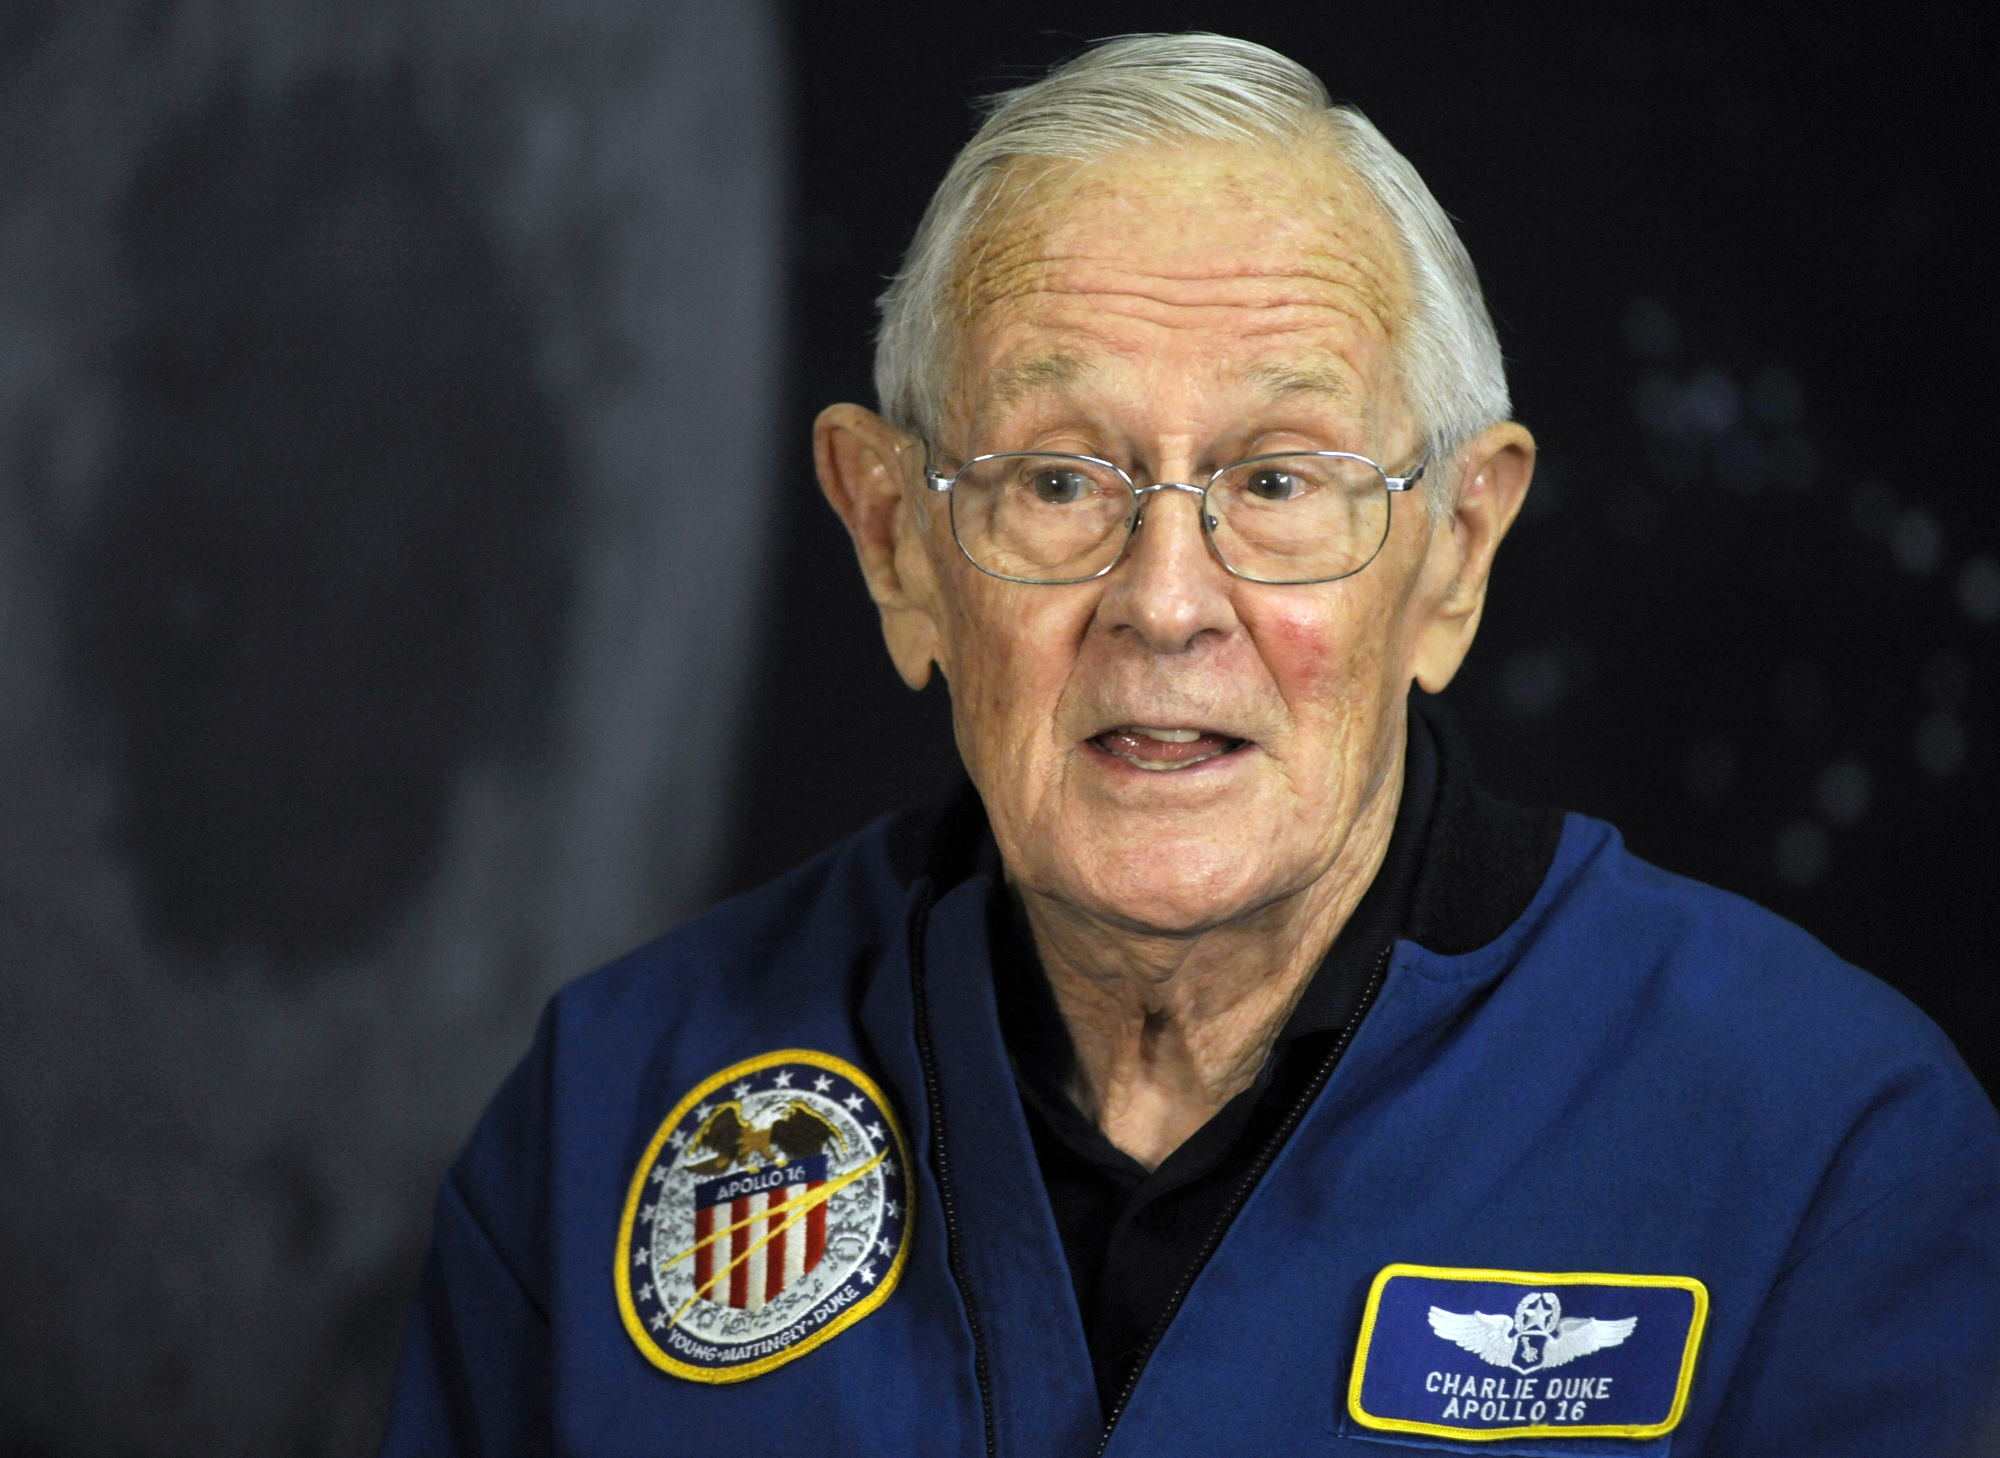 Retired NASA astronaut Charlie Duke, 86, discusses the 50th anniversary of his trip to the moon aboard Apollo 16 in Huntsville, Ala., on Wednesday, April 20, 2022. The capsule is housed at the U.S. Space and Rocket Center, located near NASA's Marshall Space Flight Center. (AP Photo/Jay Reeves)